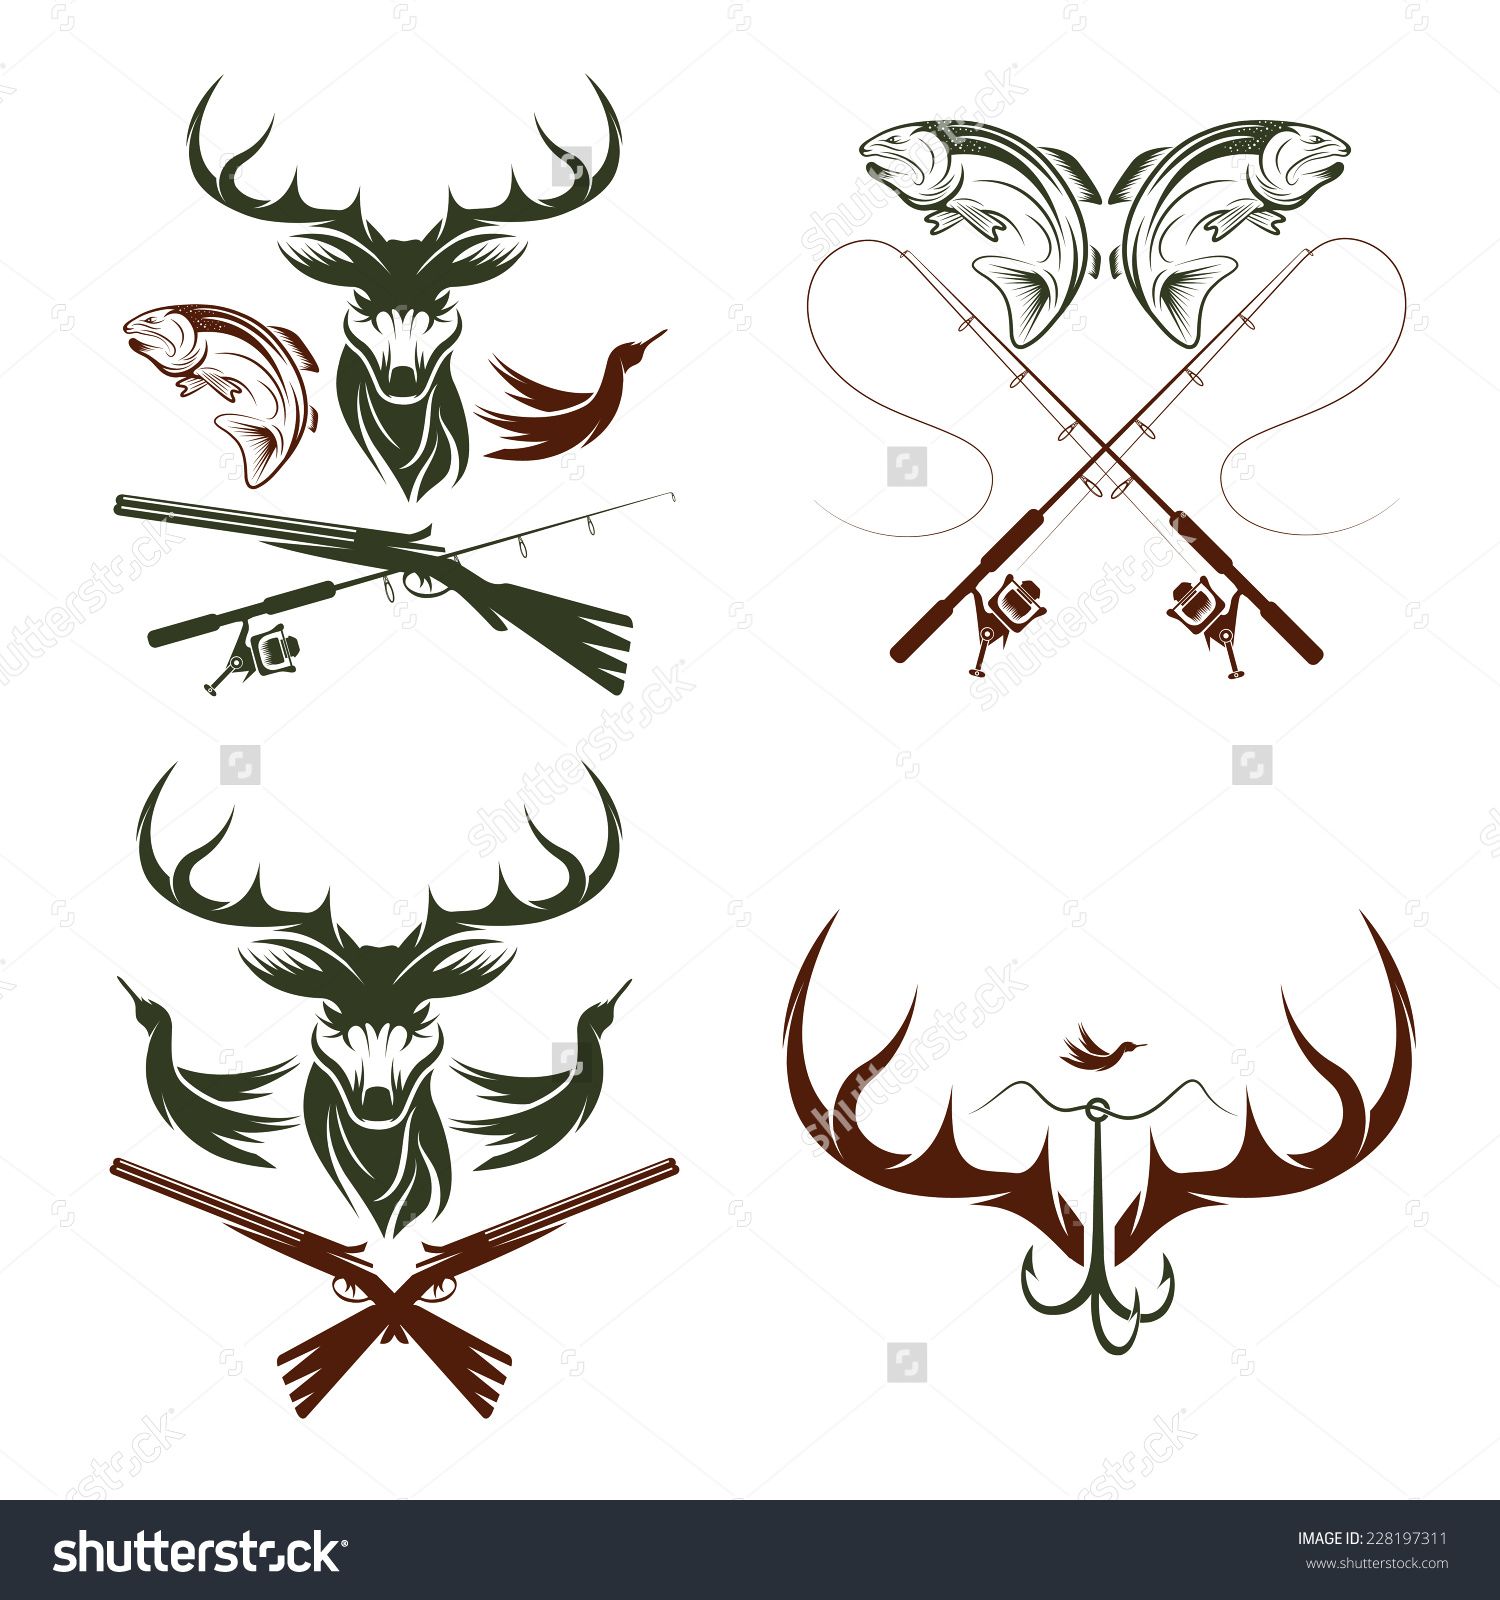 hunting and fishing clipart.